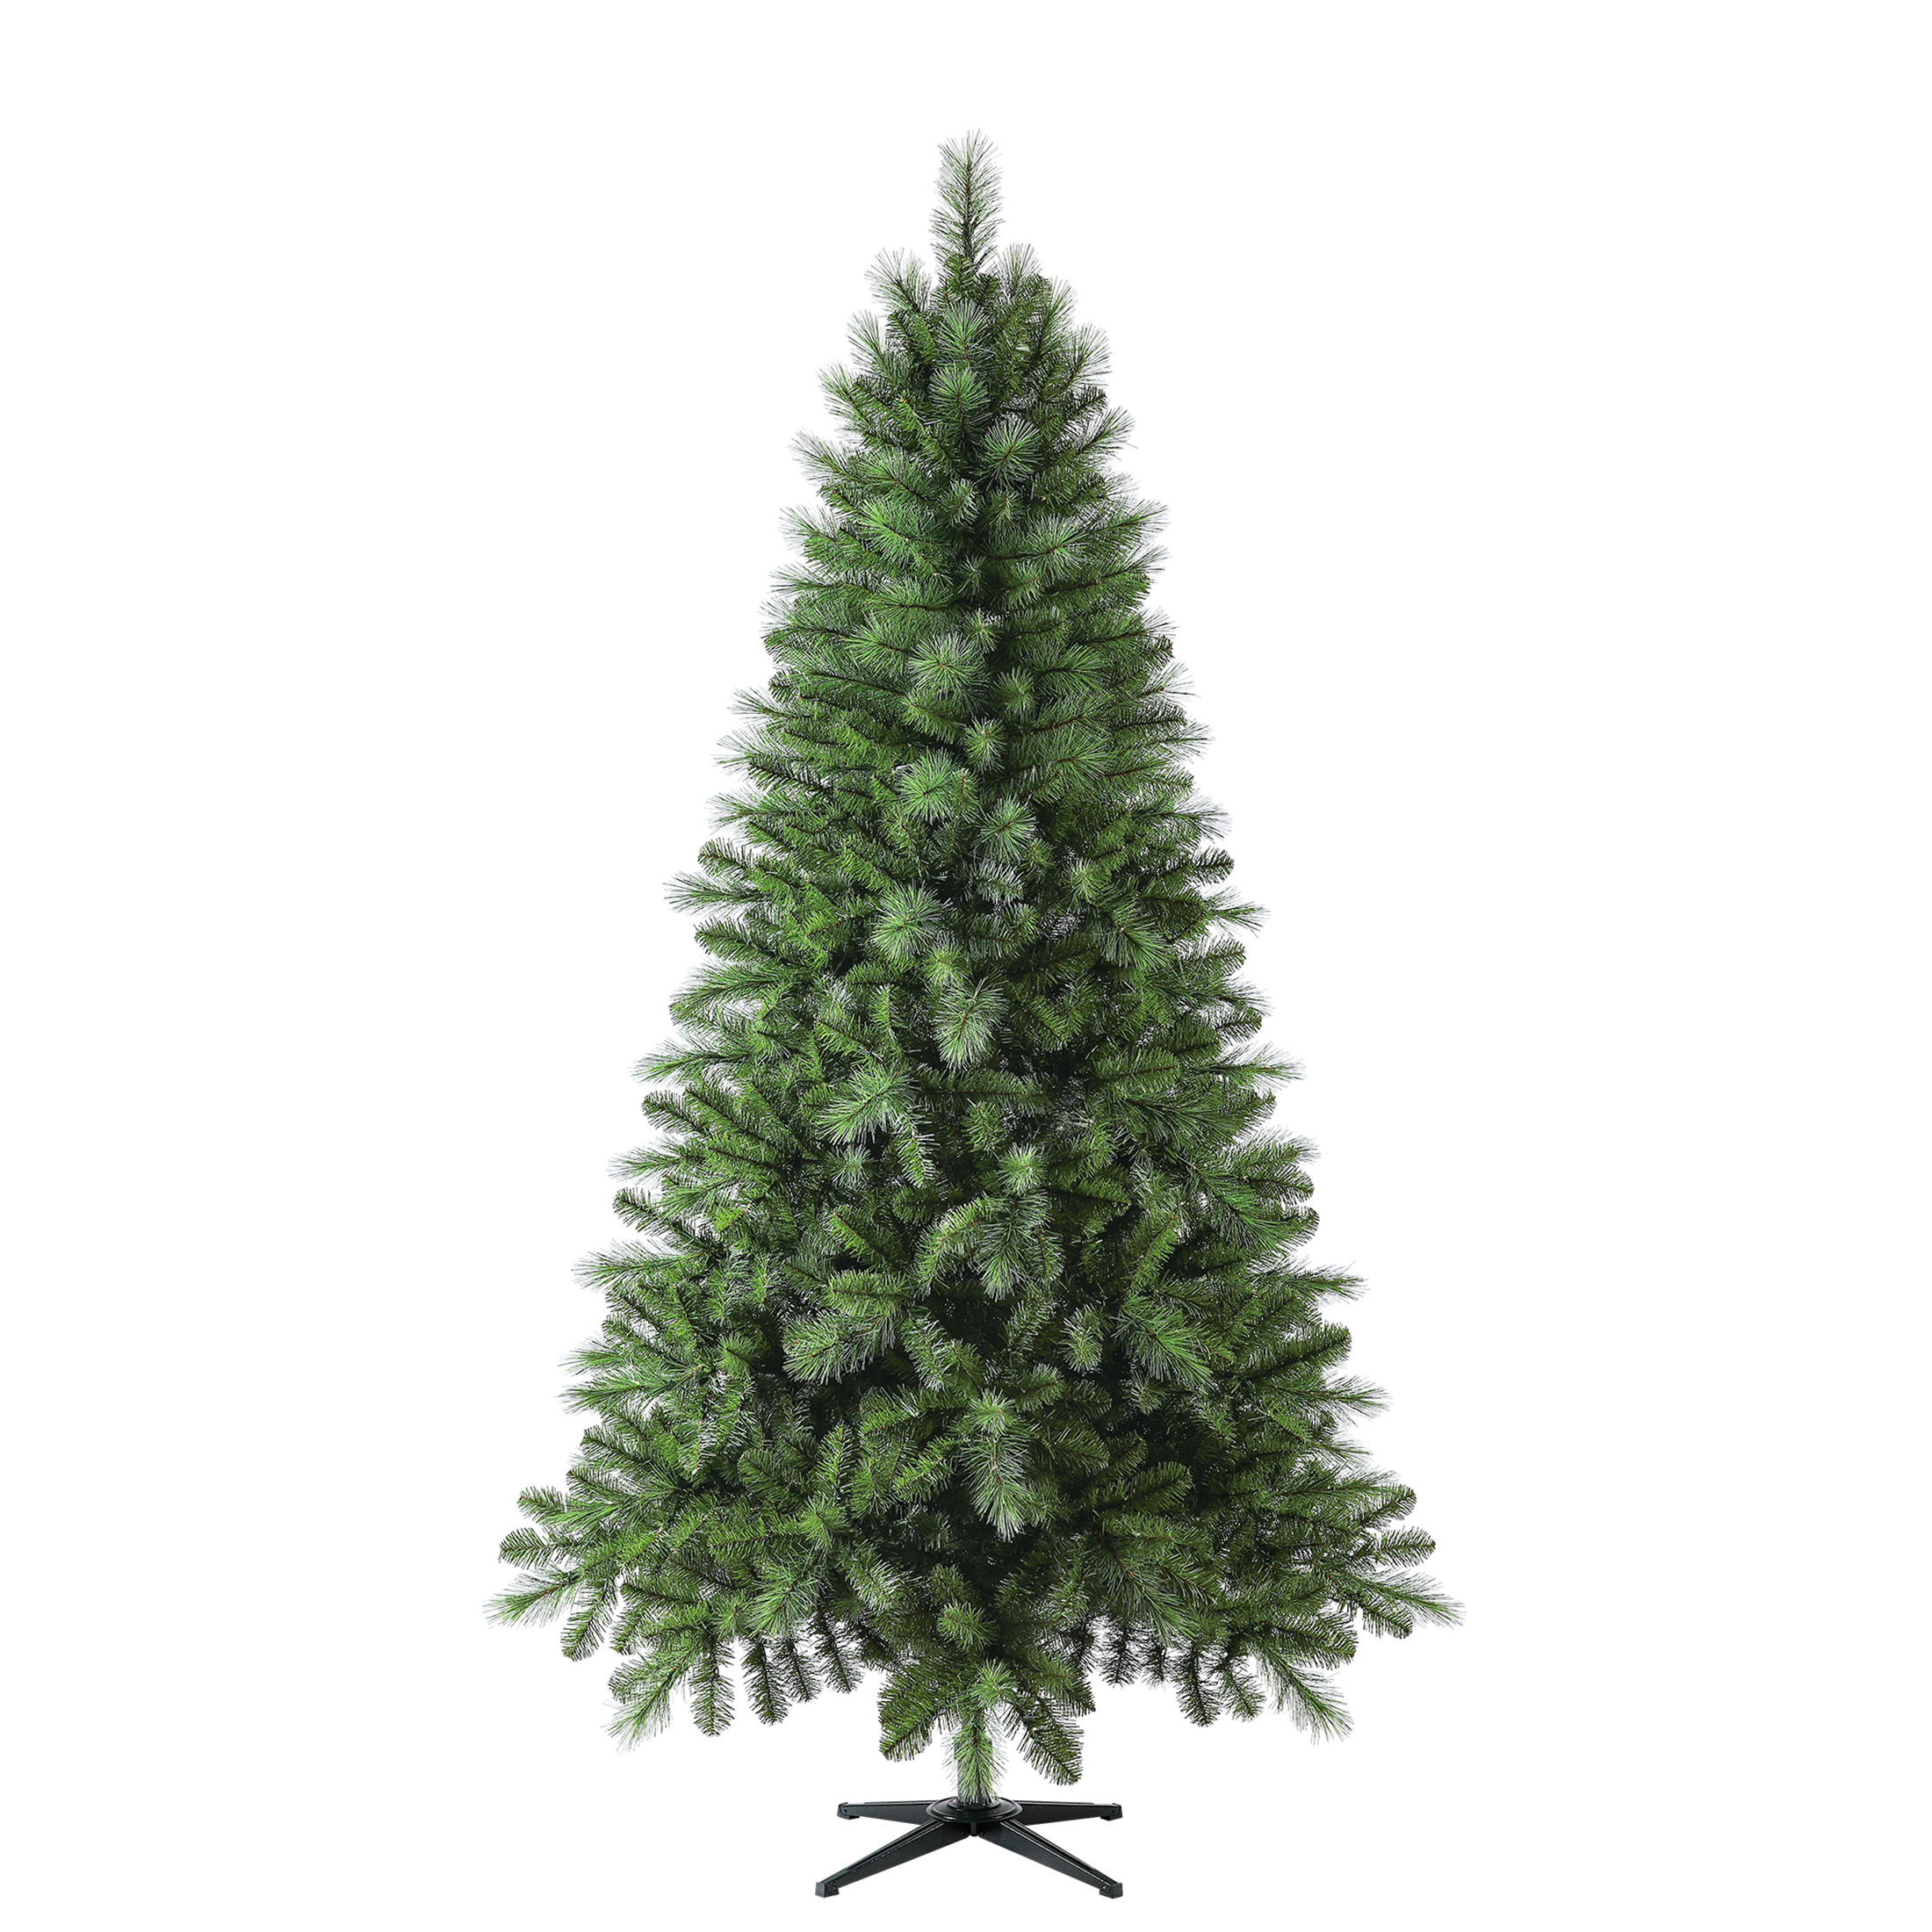 Evergreen Classics Westwood Clear Prelit LED Green Full Christmas Tree, 7.5' - image 2 of 7